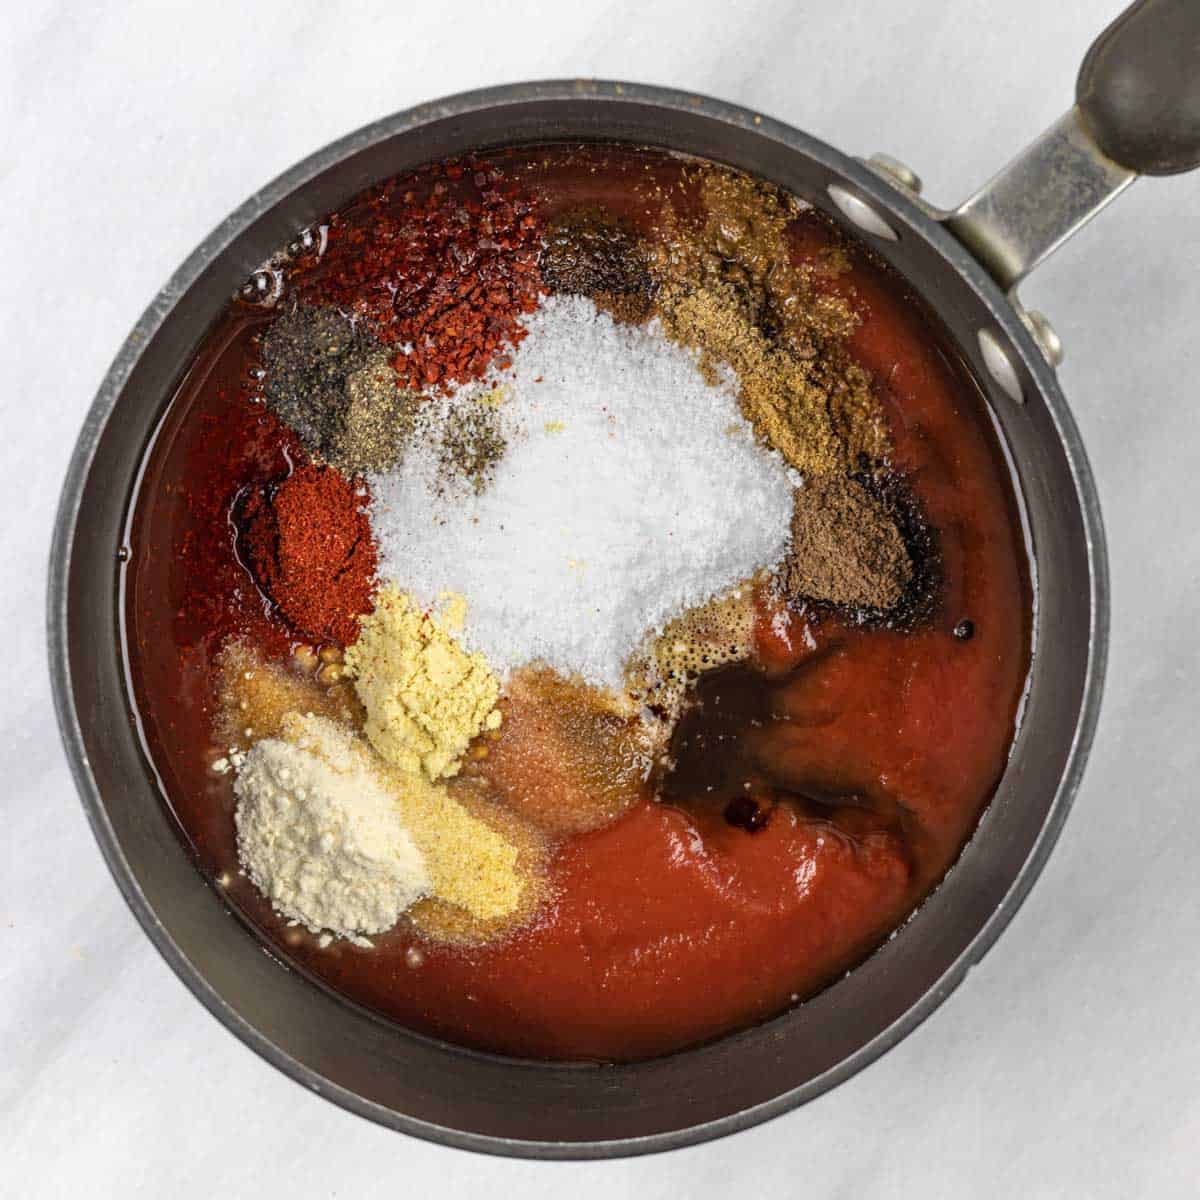 Tomato sauce and powdered ingredients in piles in a saucepan ready to stir and simmer.